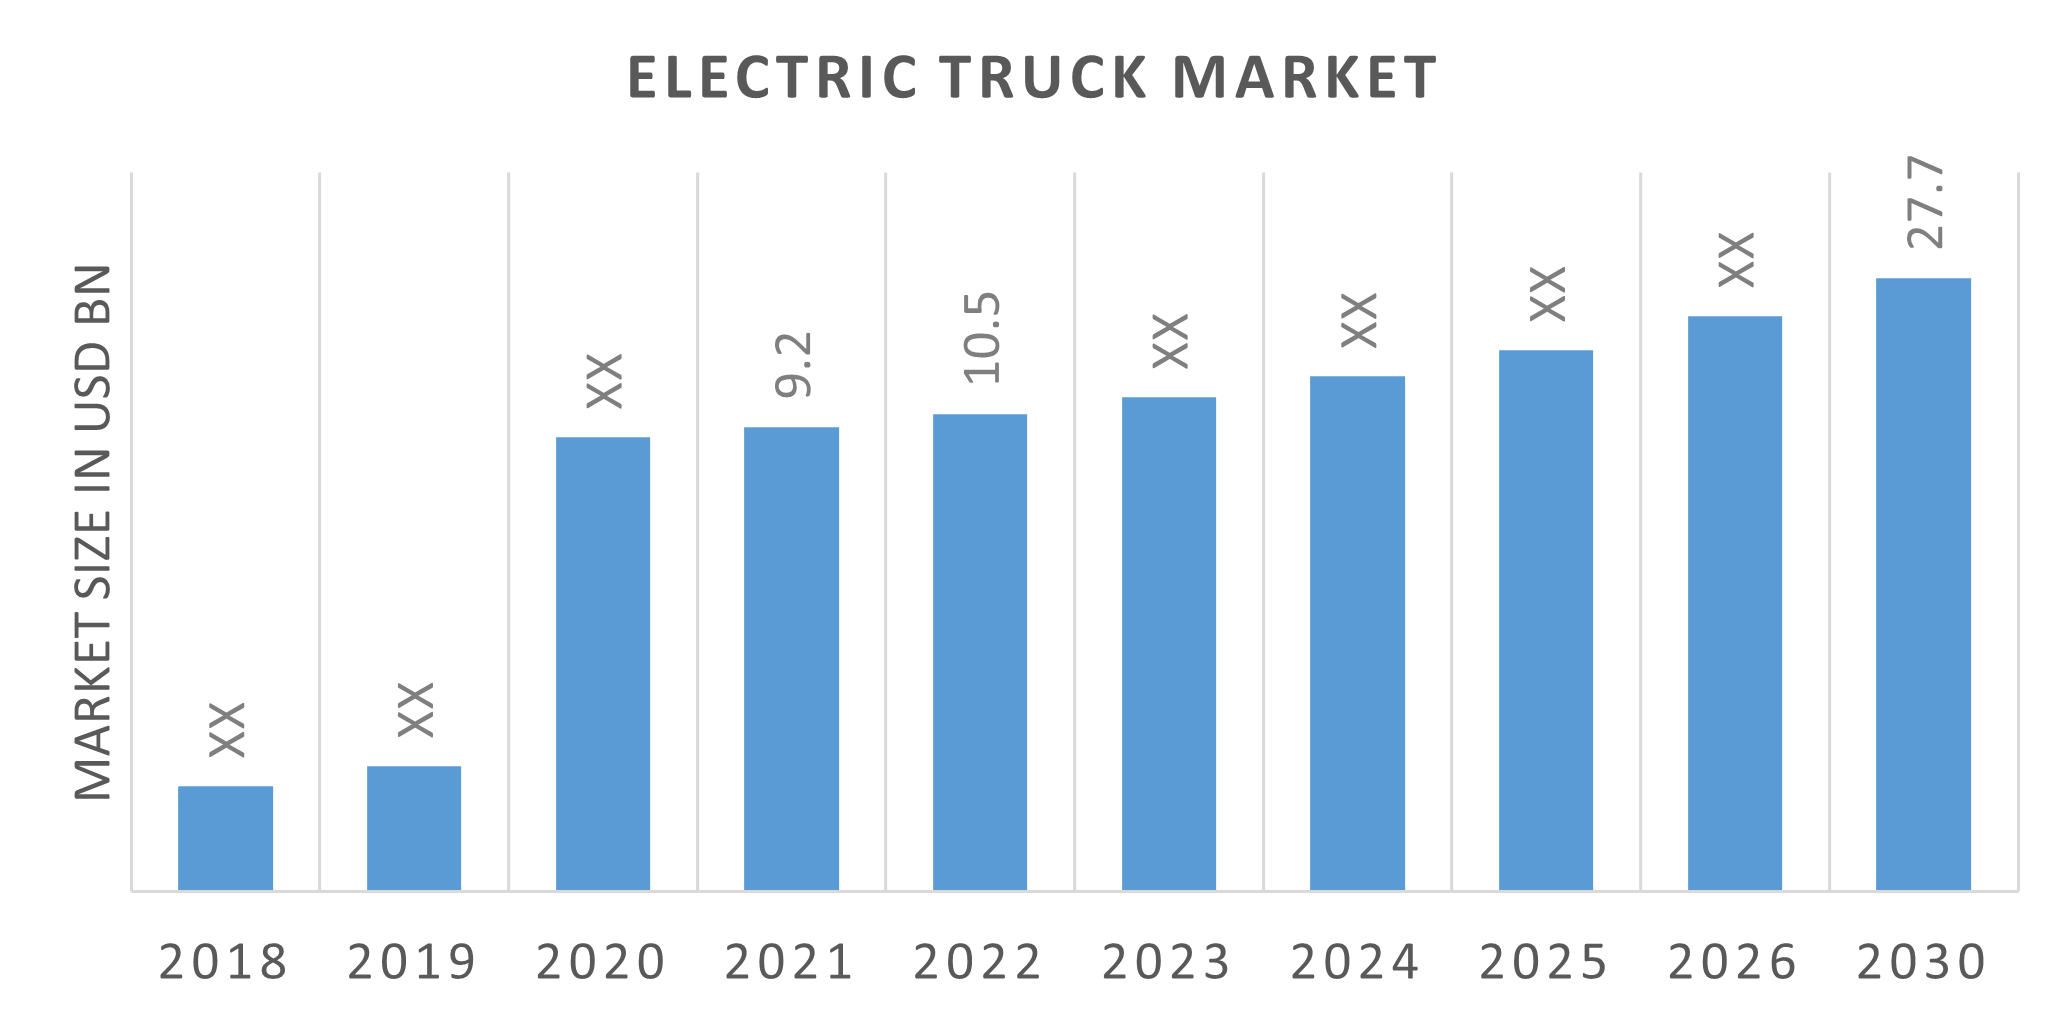 Global Electric Truck Market Overview